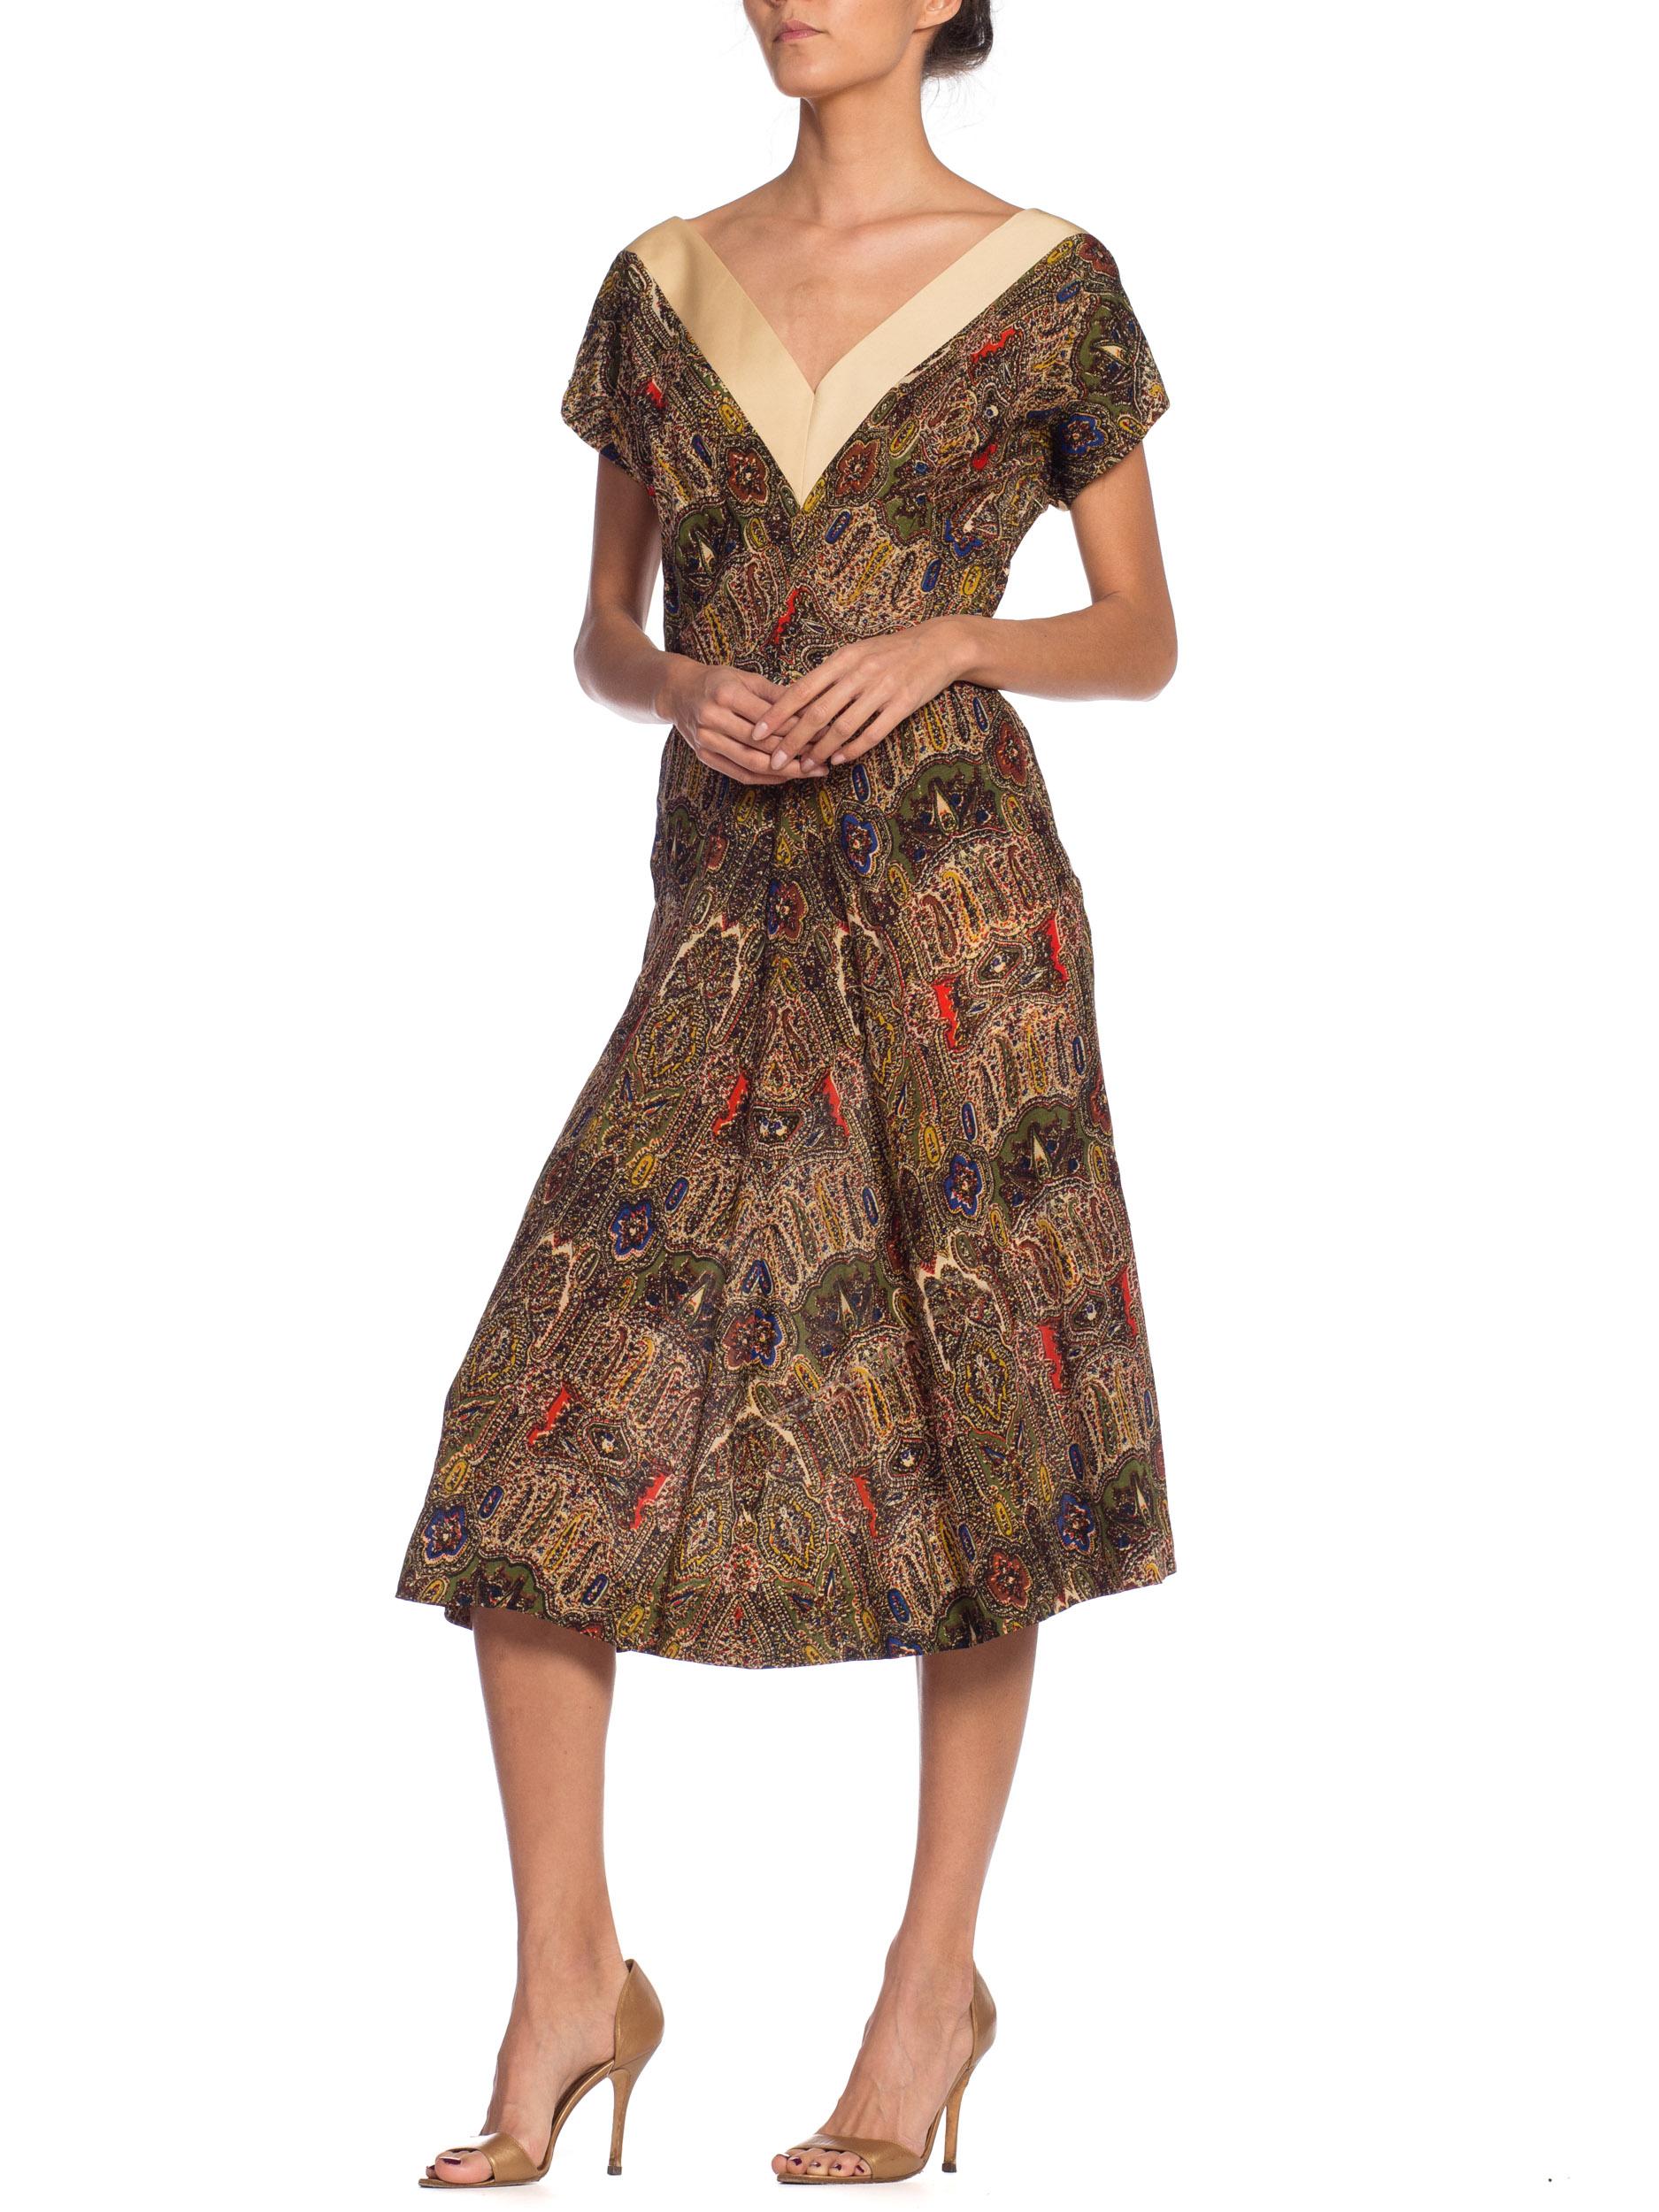 Brown 1950S CLAIRE MC CARDELL Multicolor Paisley Wool Day Dress